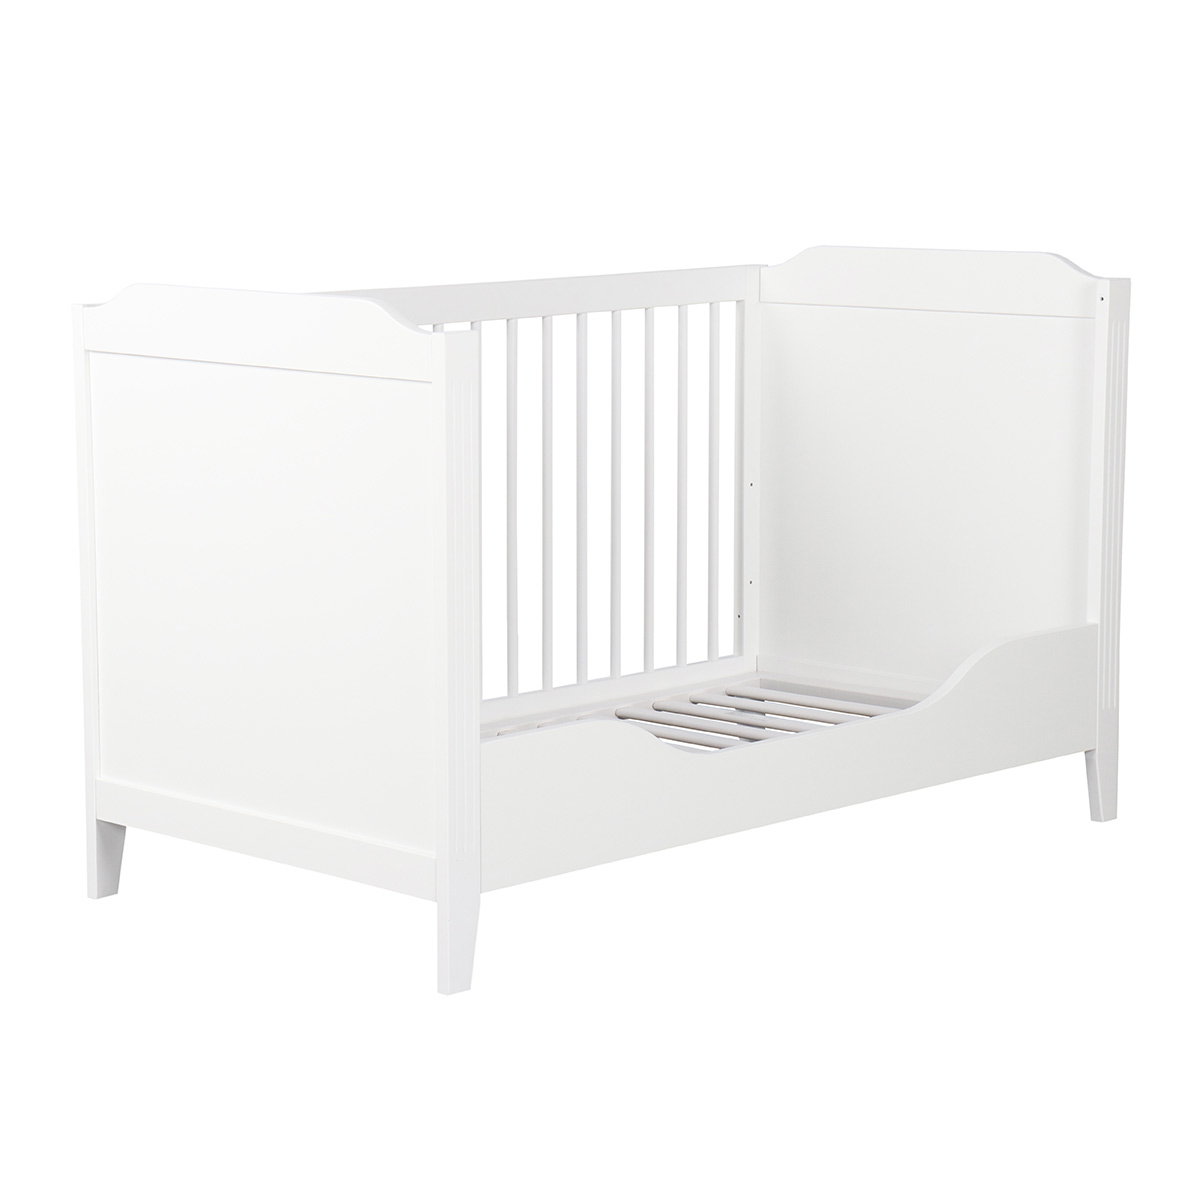 Scalable baby bed Opéra White 70x140